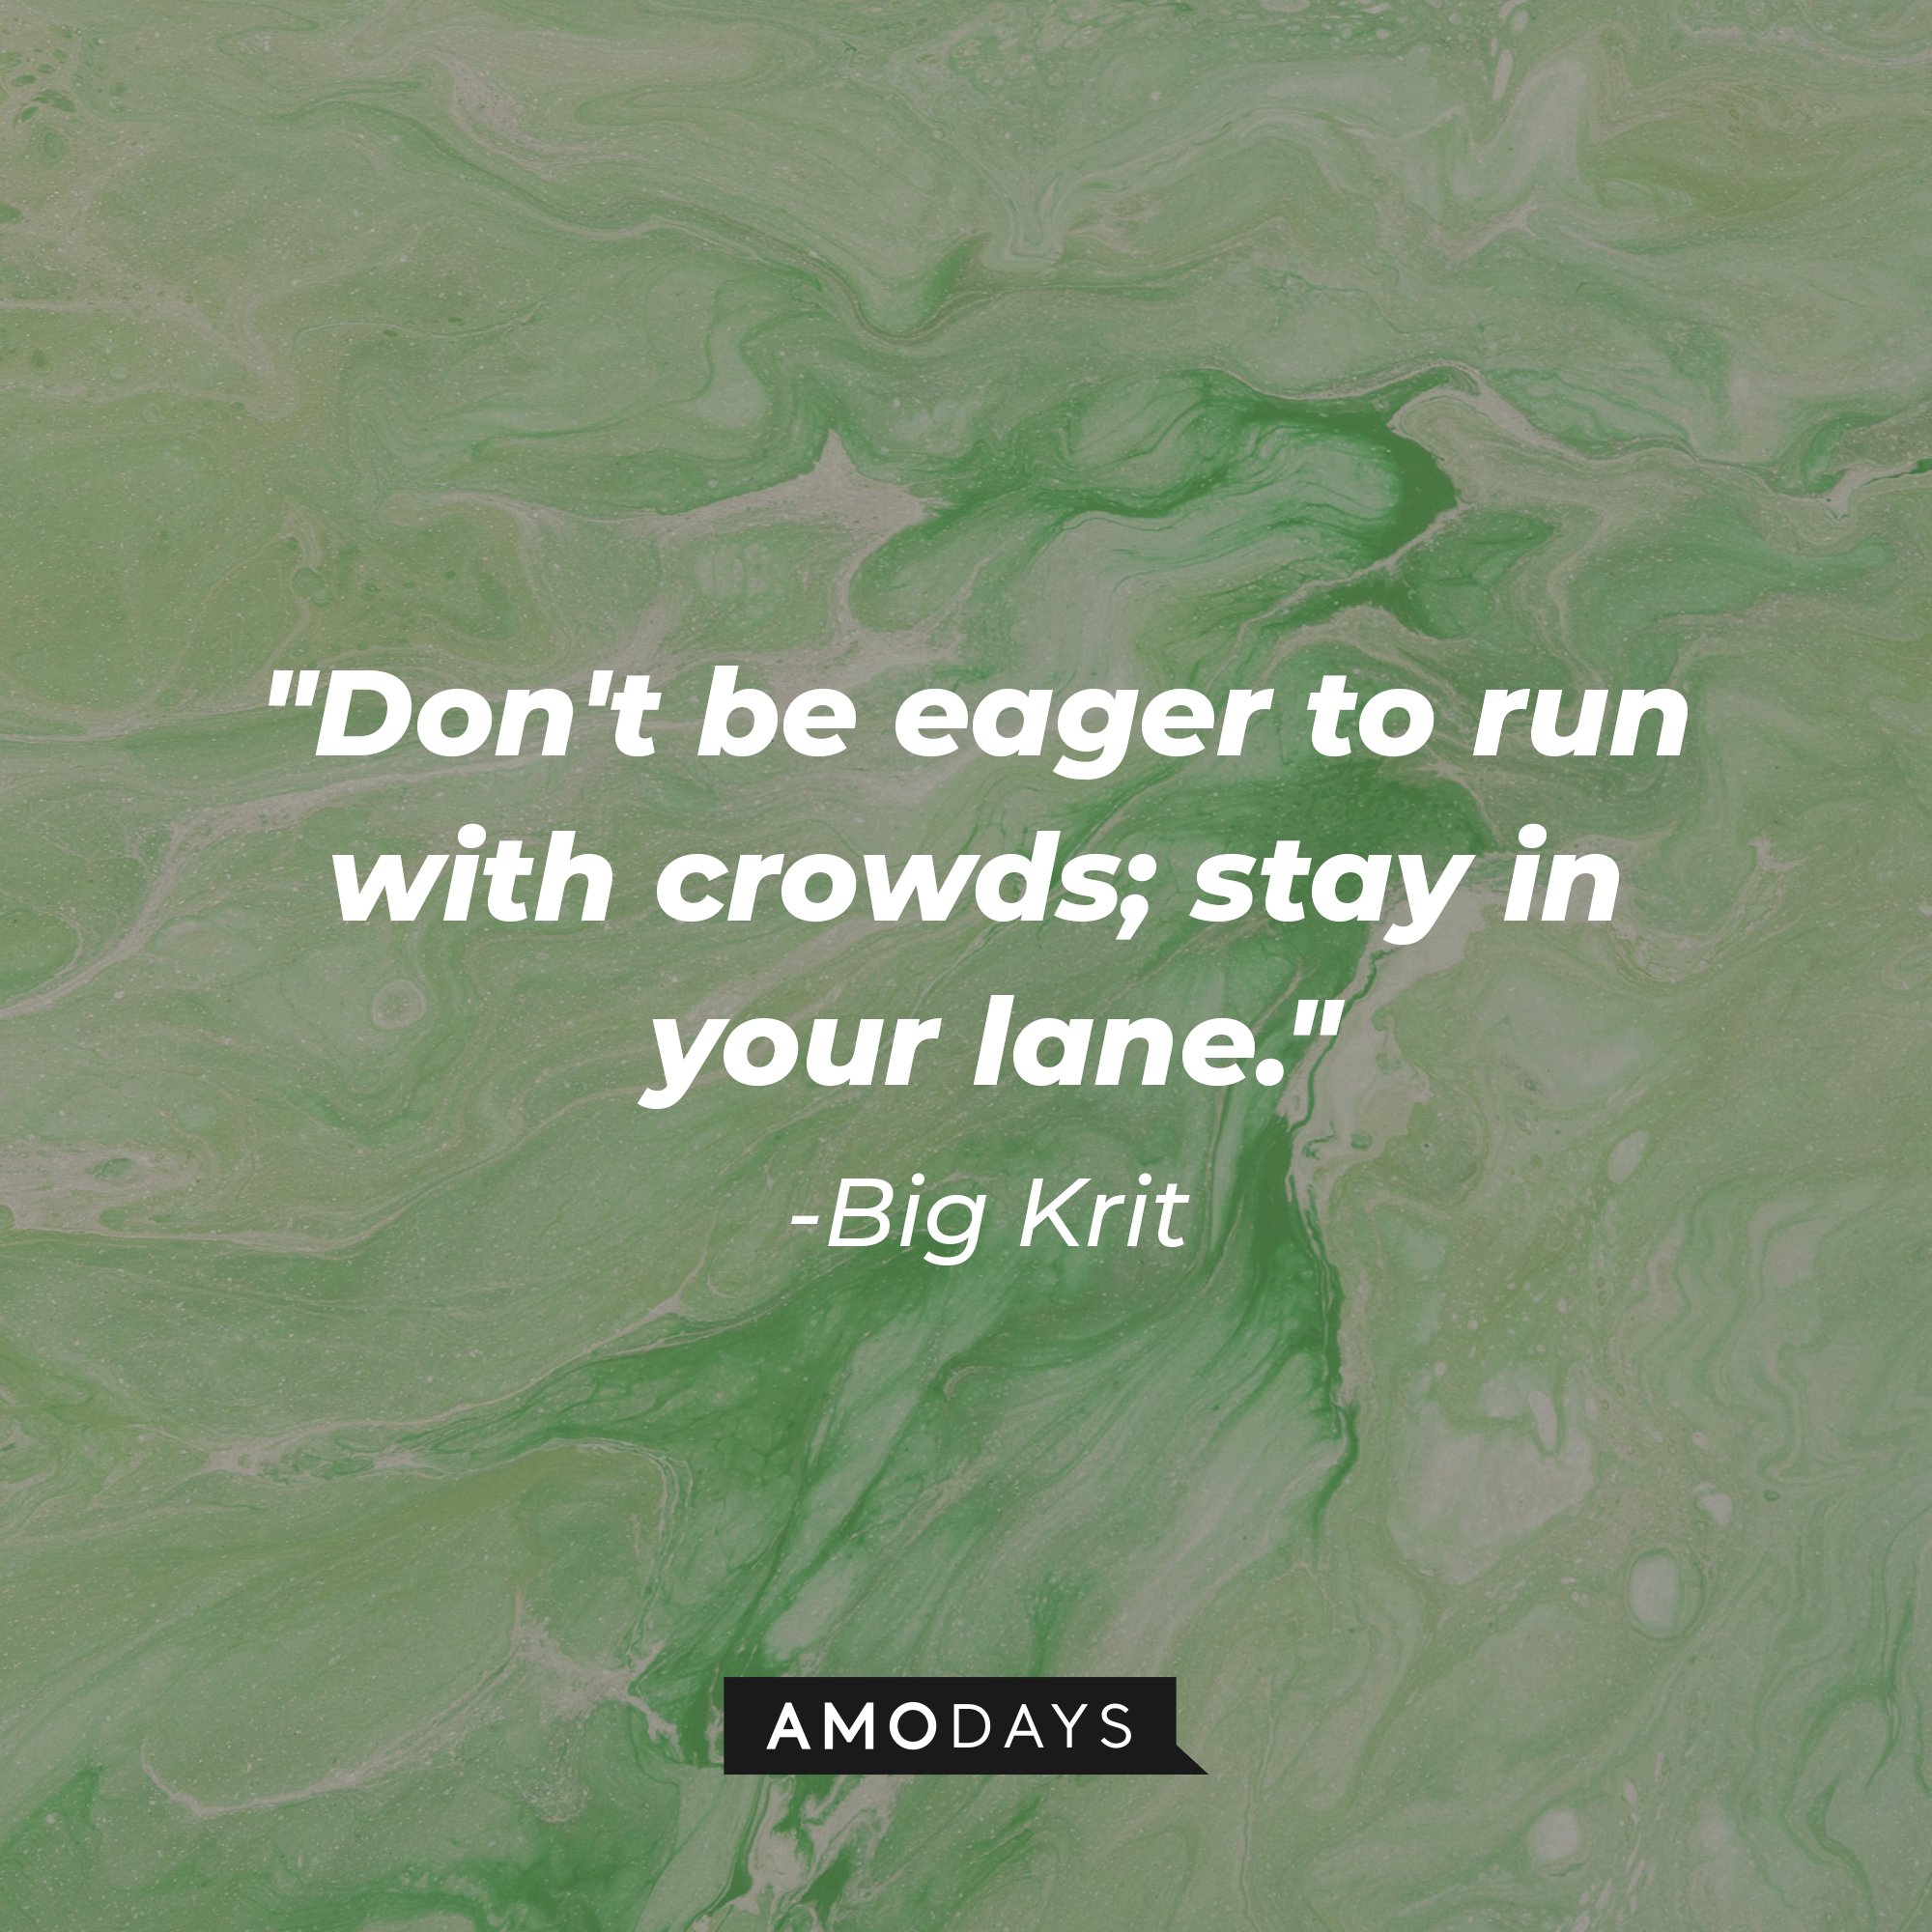  Big Krit’s quote: "Don't be eager to run with crowds; stay in your lane." | Image: AmoDays